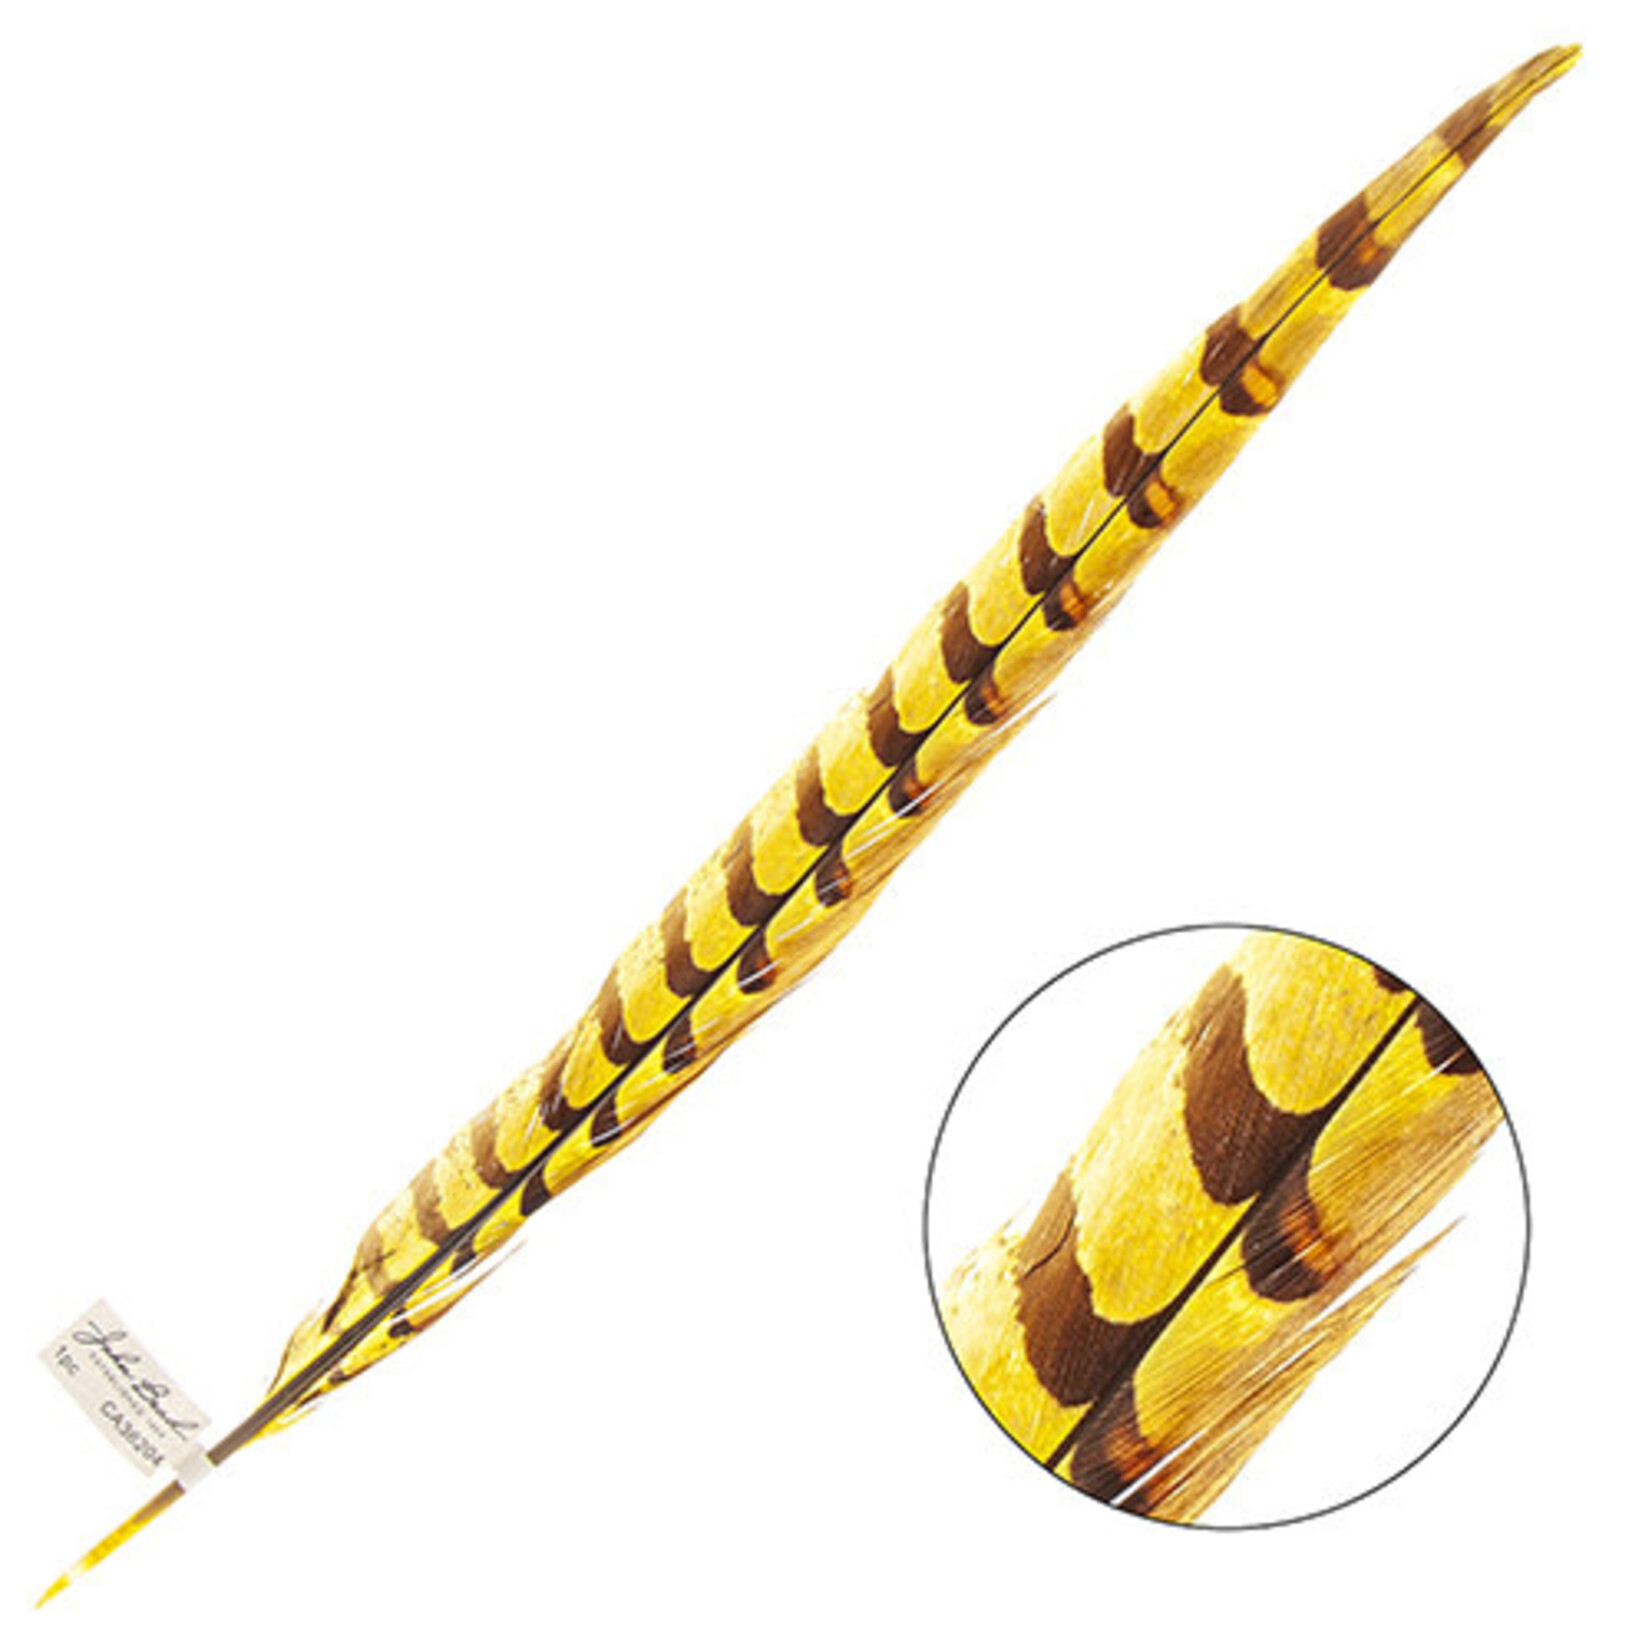 Reeves Pheasant Tail Yellow 20 - 25 Inch (1 Piece)